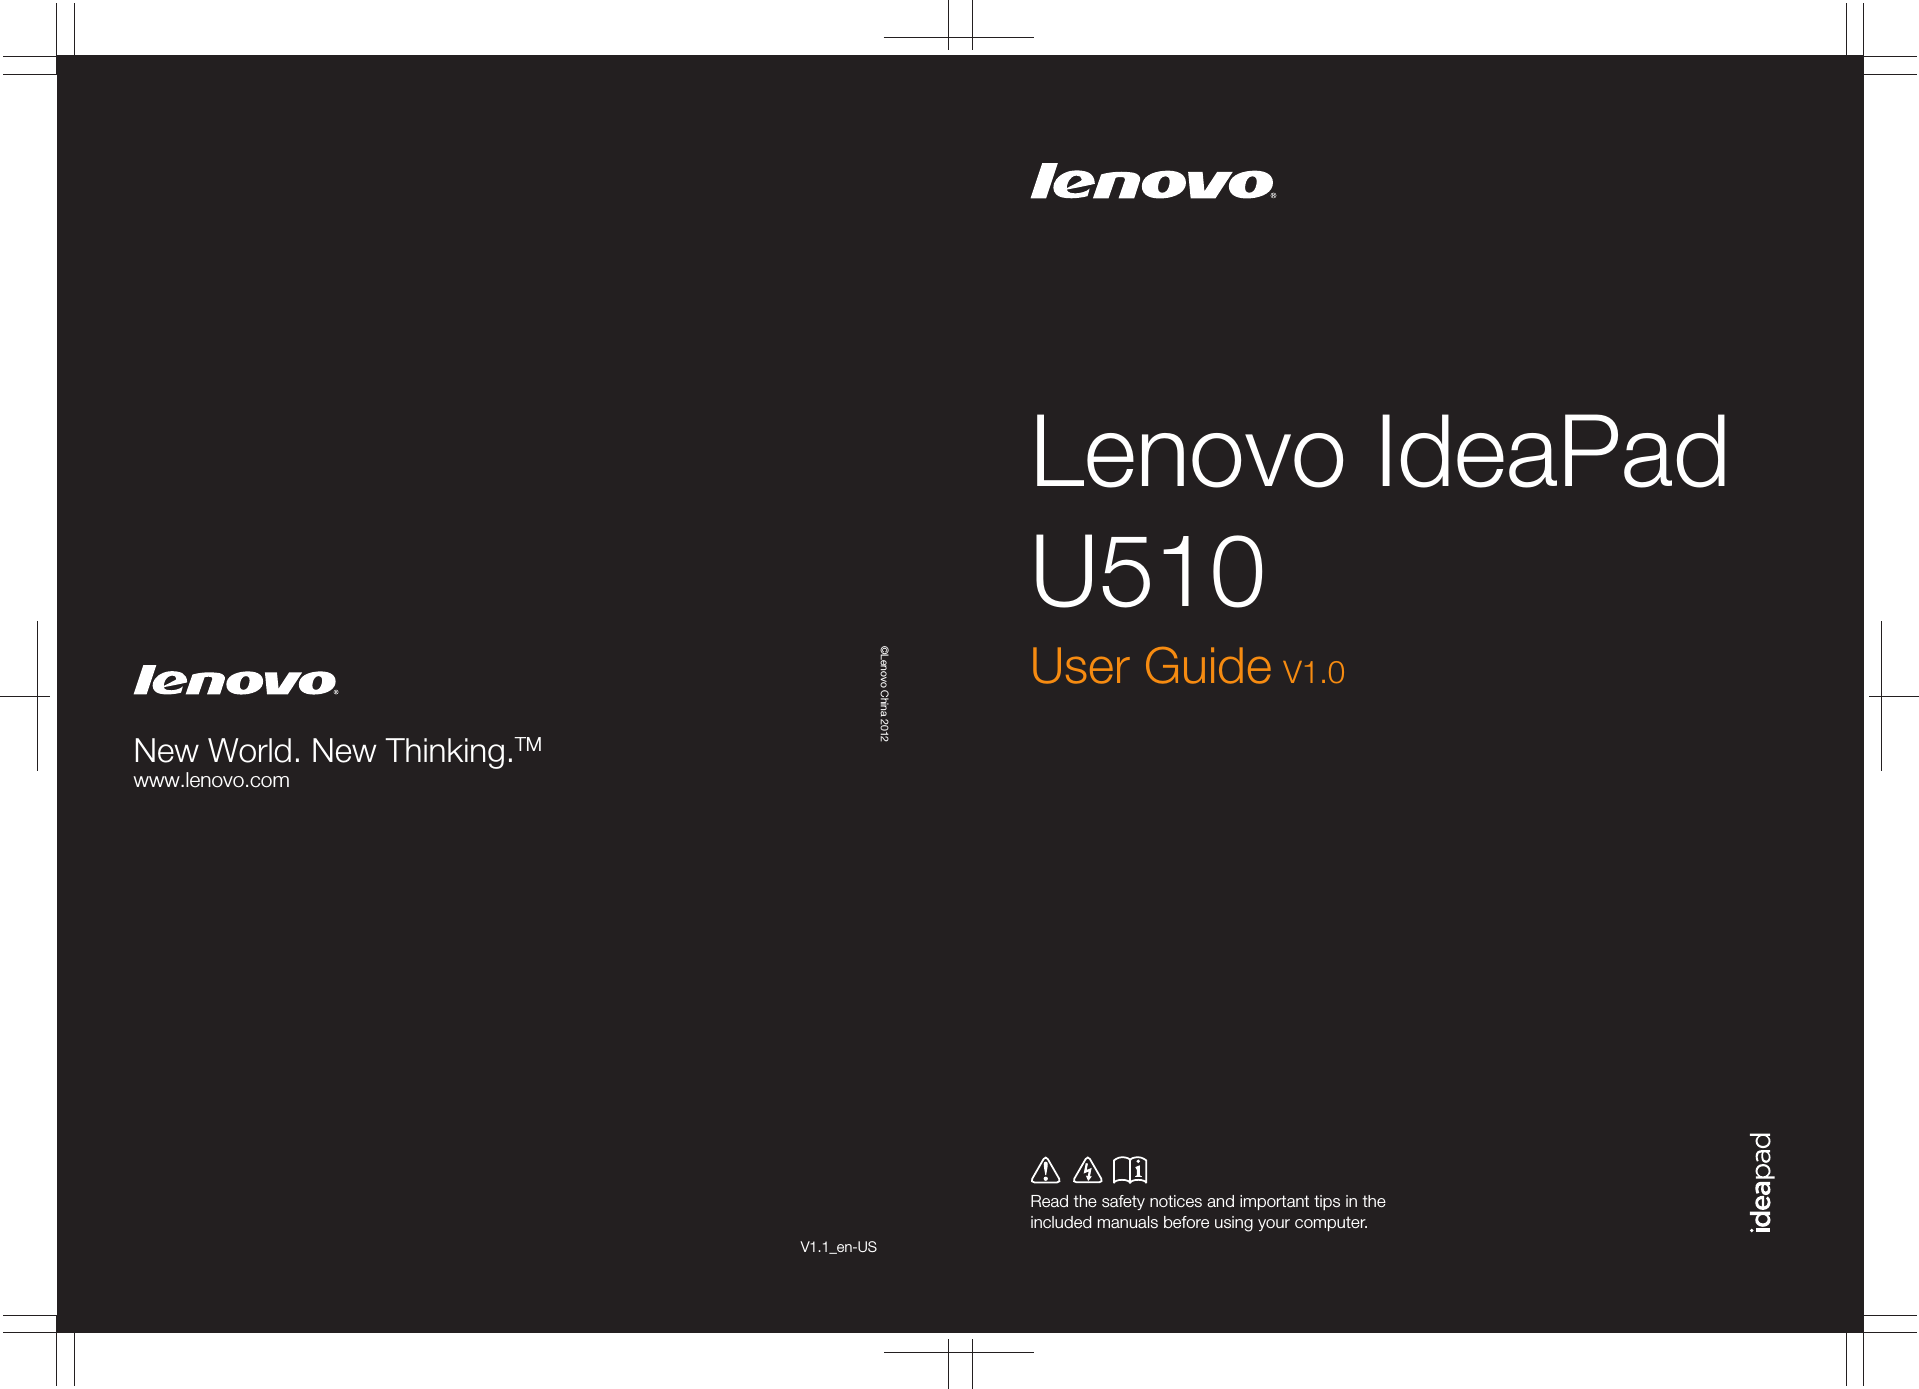 Lenovo IdeaPad U510Read the safety notices and important tips in the included manuals before using your computer.©Lenovo China 2012New World. New Thinking.TMwww.lenovo.comV1.1_en-USUser Guide V1.0